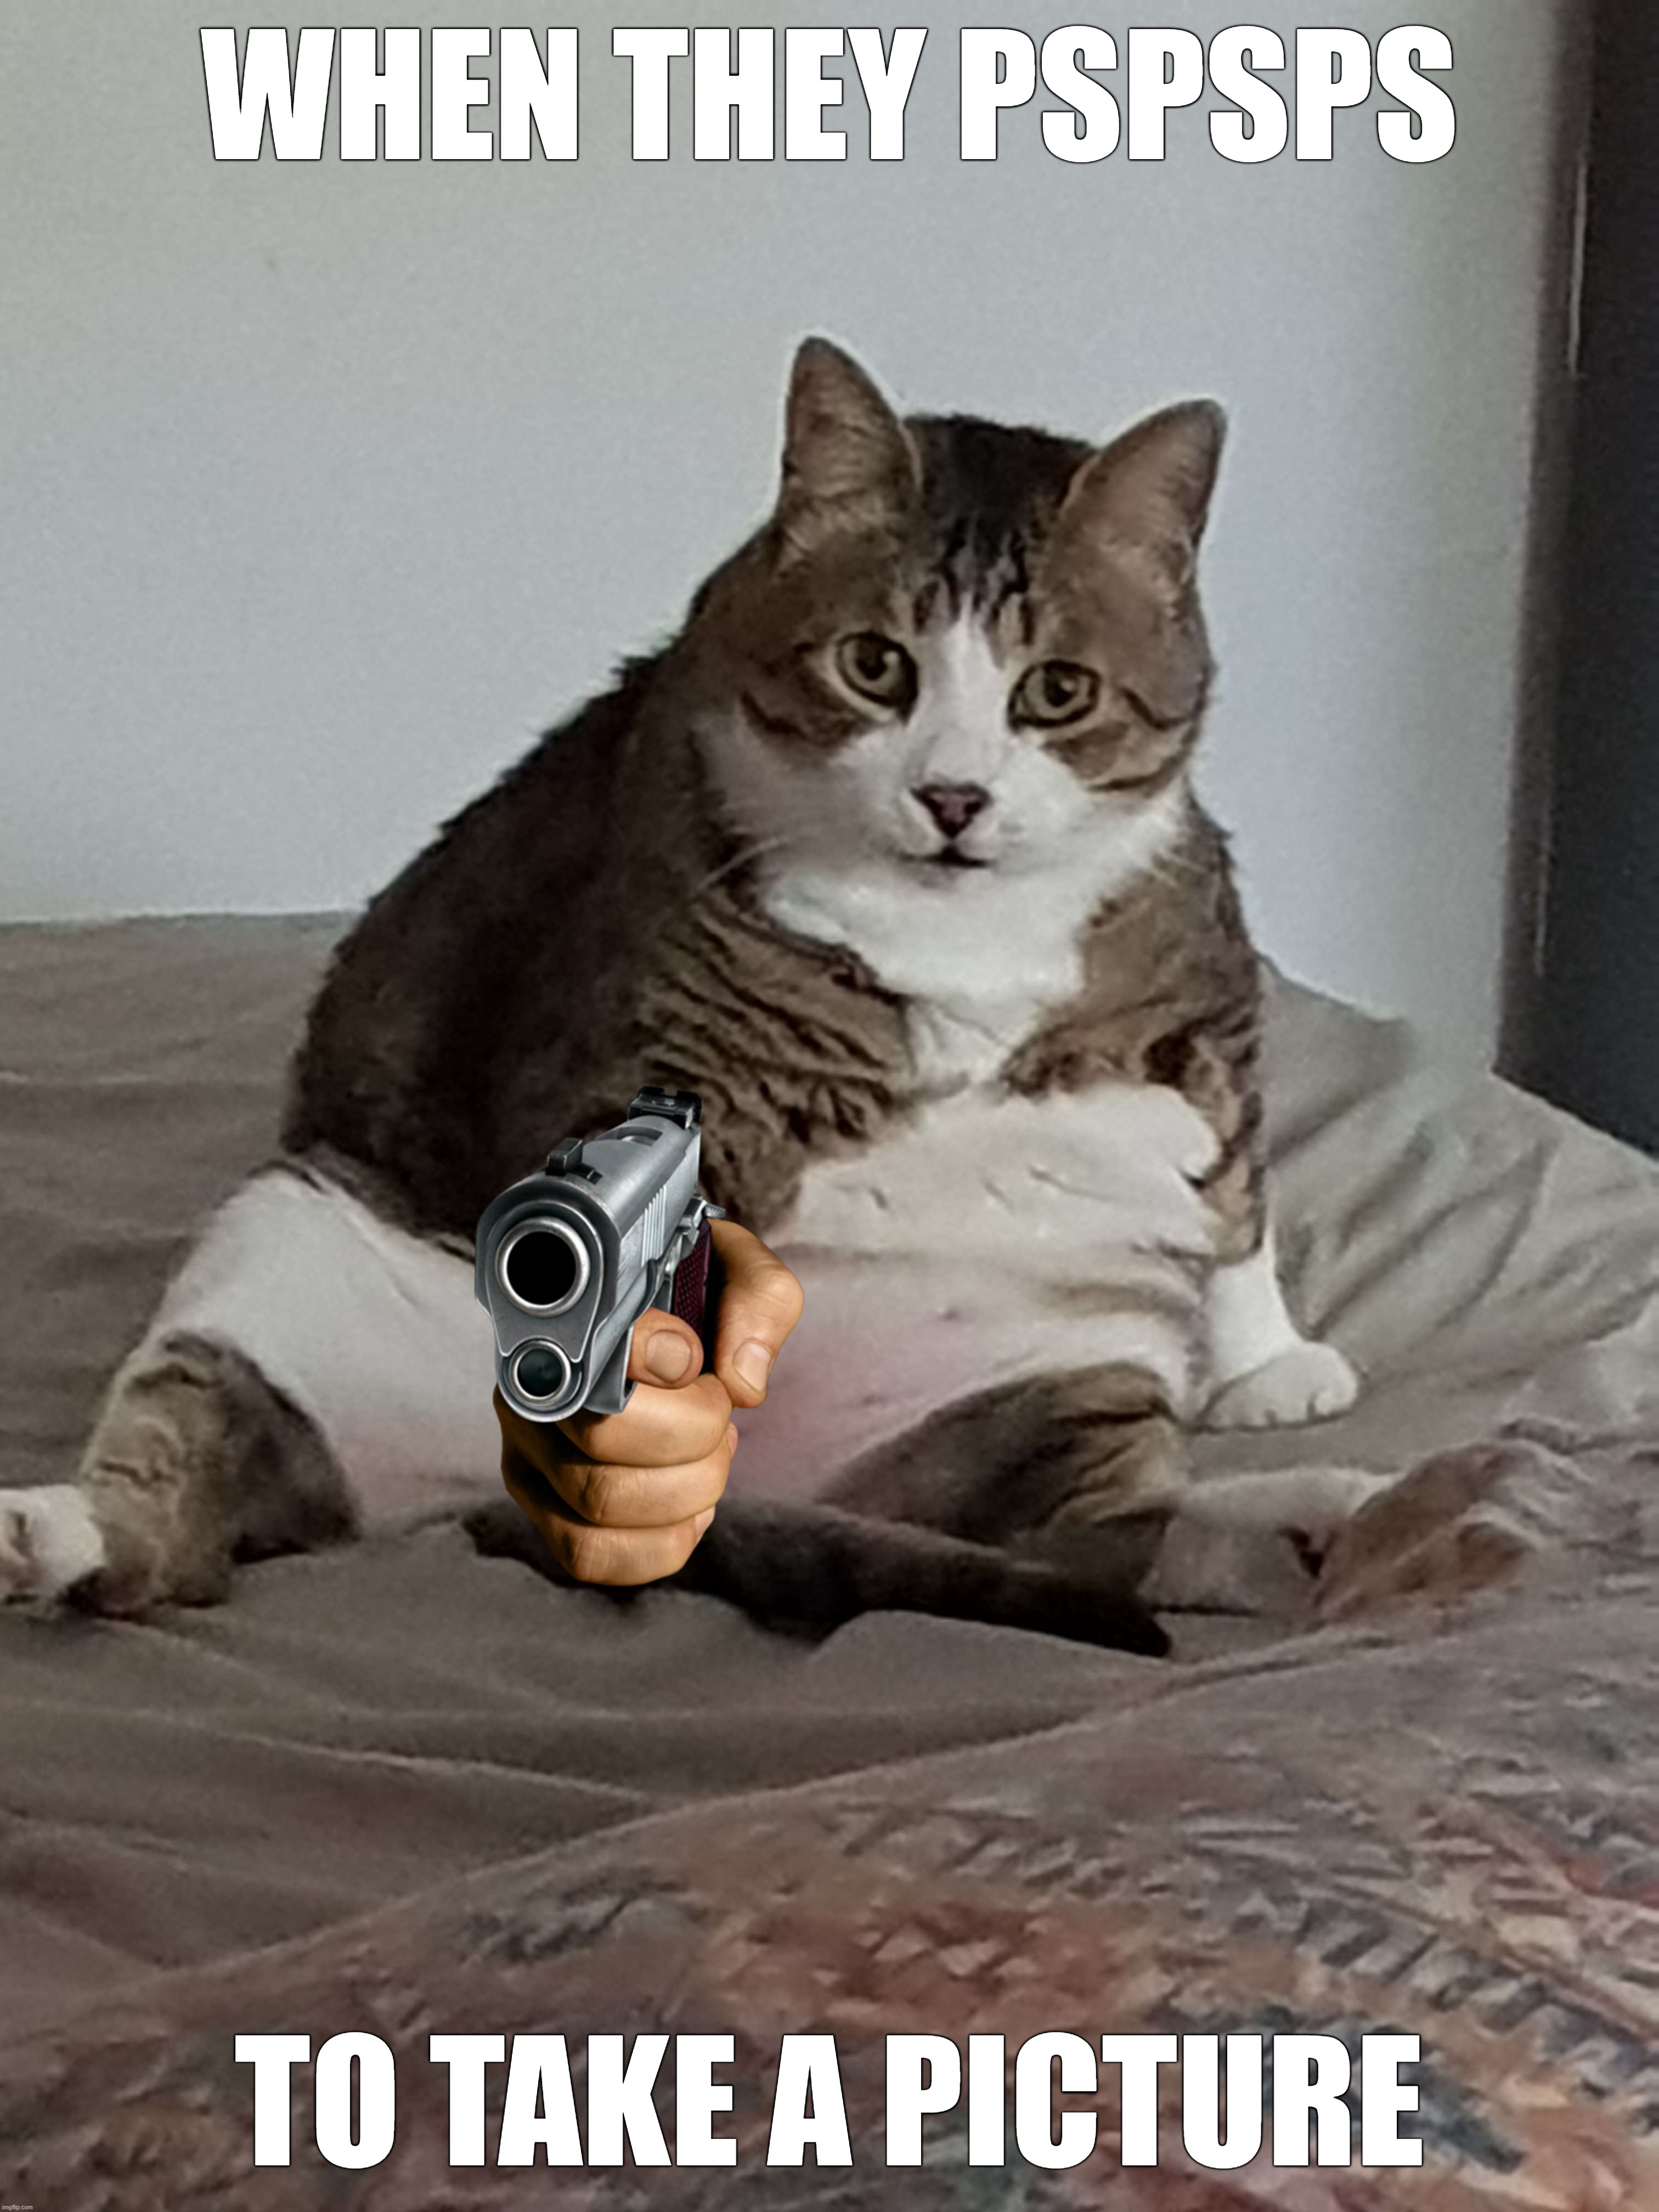 Pspspsps | WHEN THEY PSPSPS; TO TAKE A PICTURE | image tagged in cat,funny,gun,stare,fur,bed | made w/ Imgflip meme maker